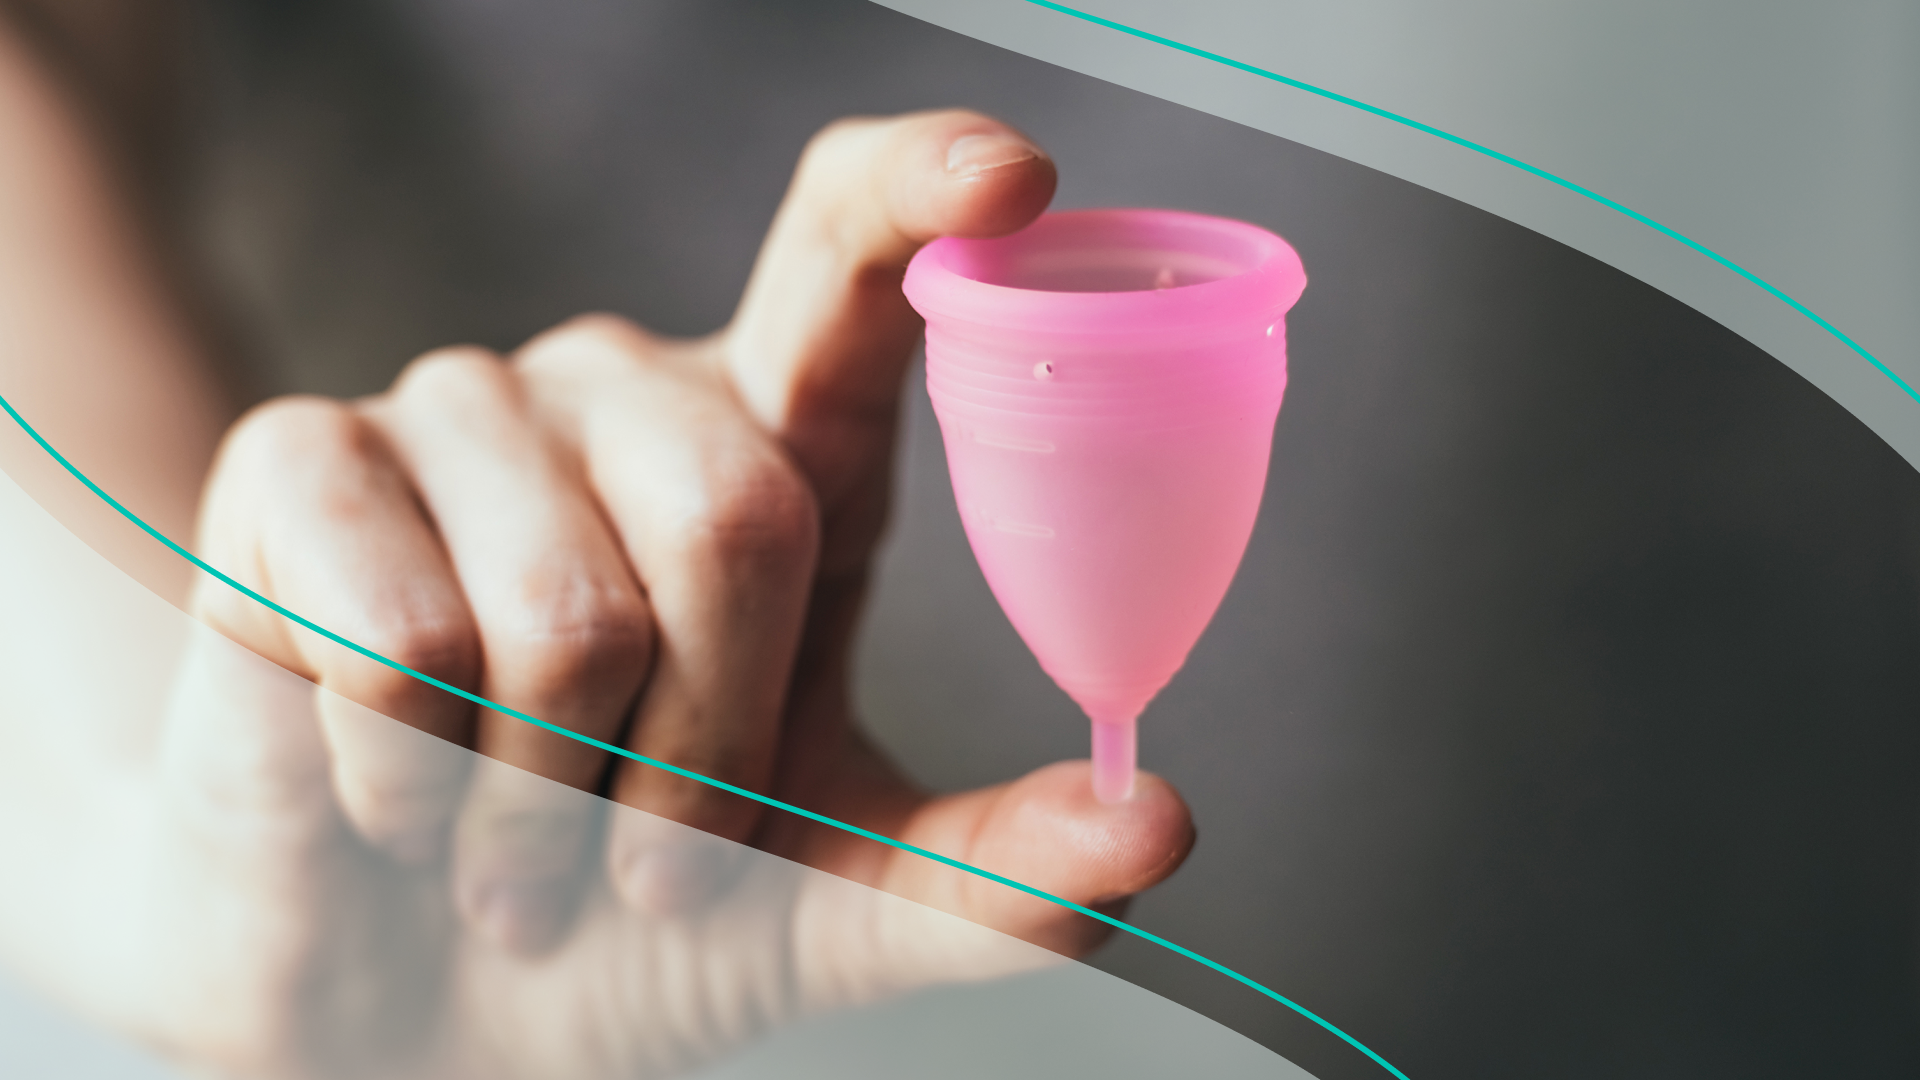 How to choose menstrual cup size? An expert shares tips